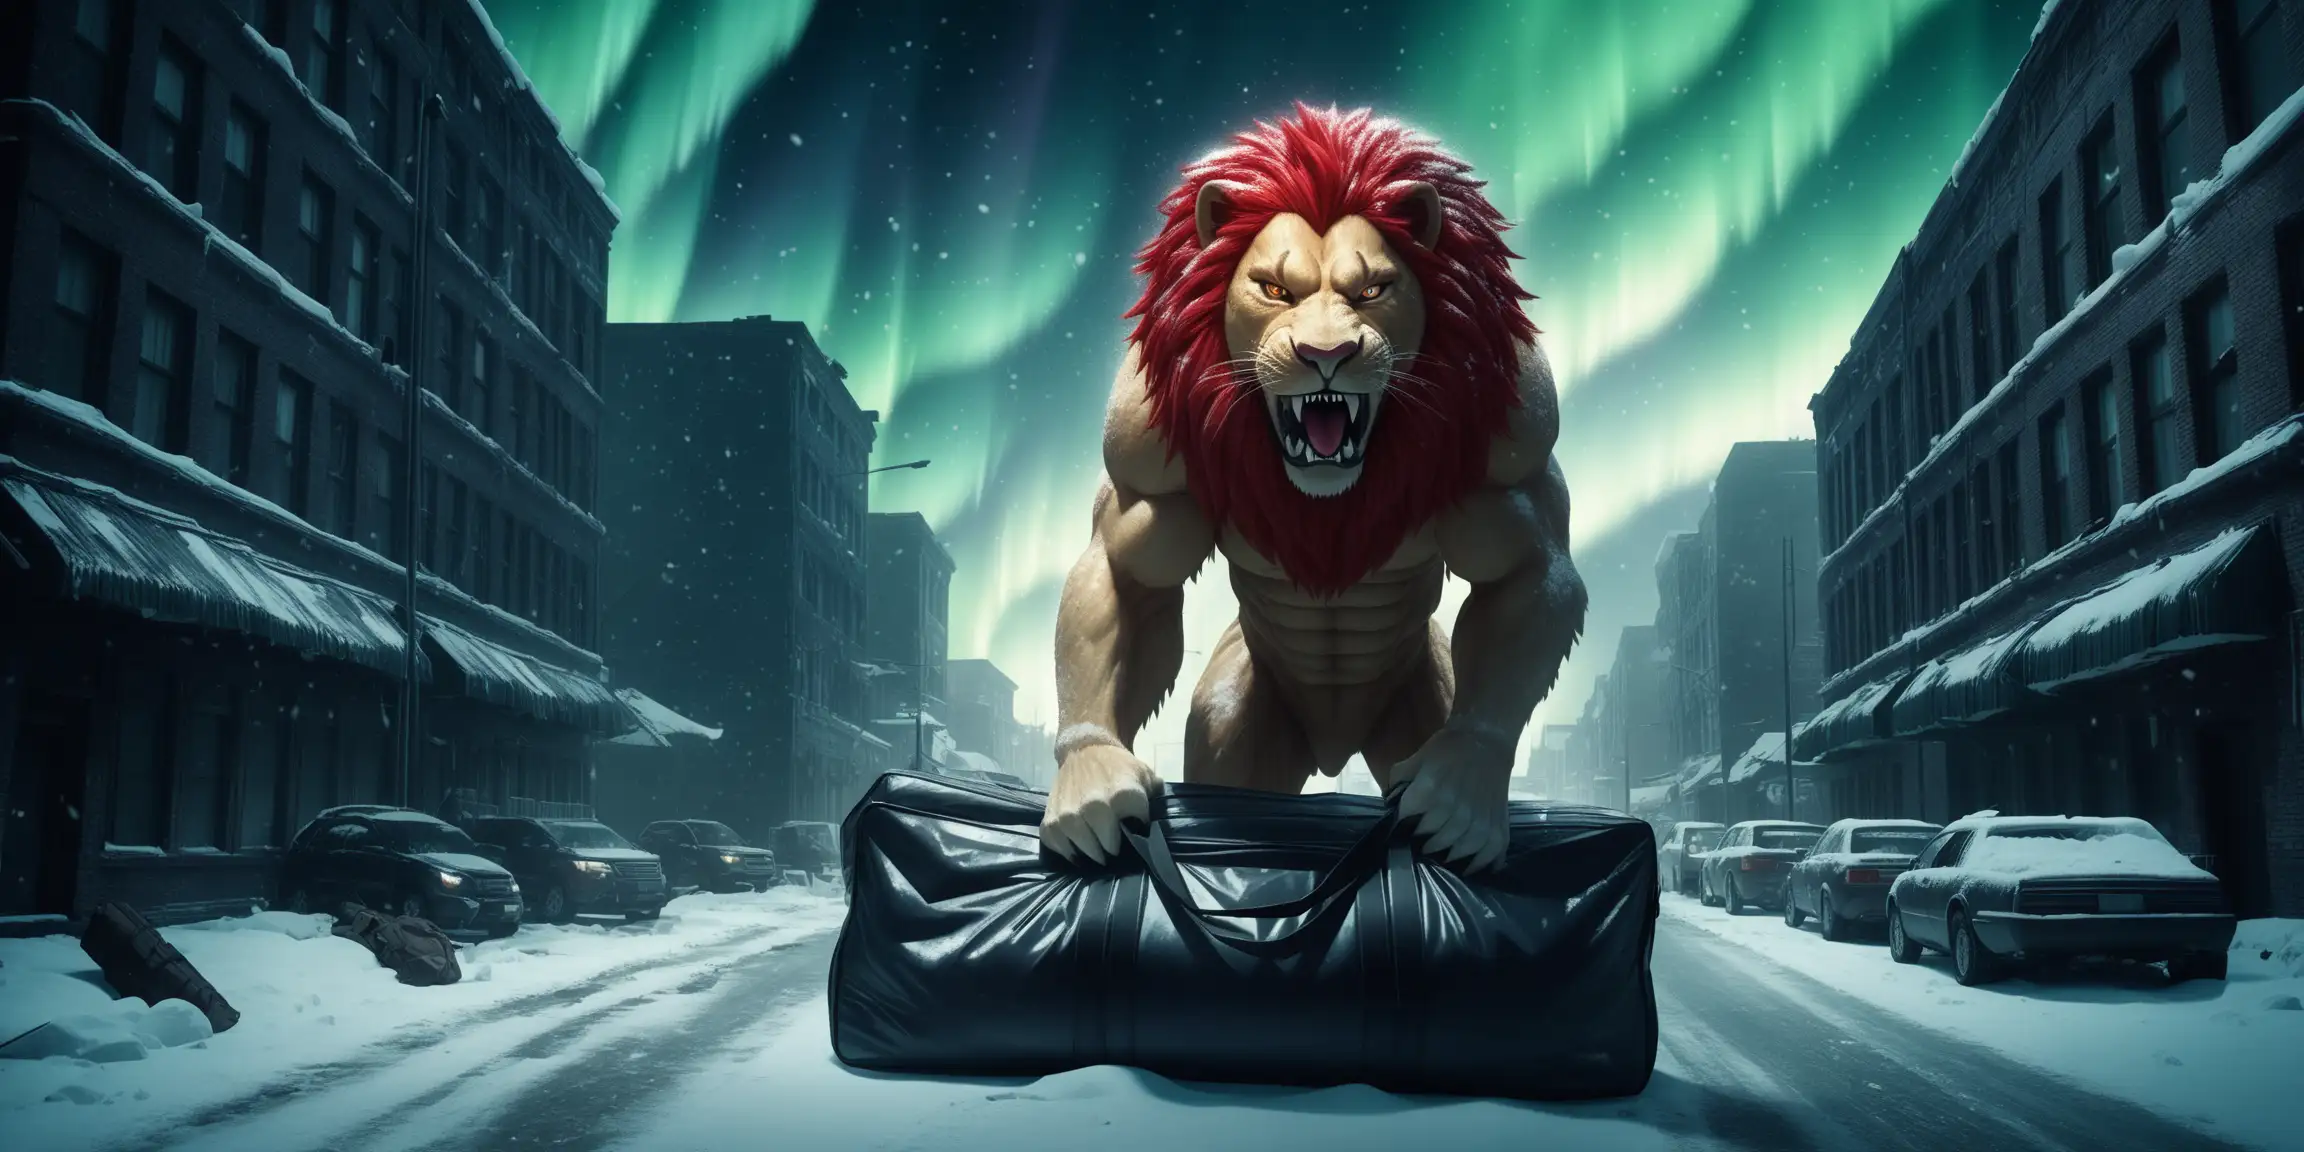 Majestic Red Lion with Cargo Journey through an Abandoned City Street